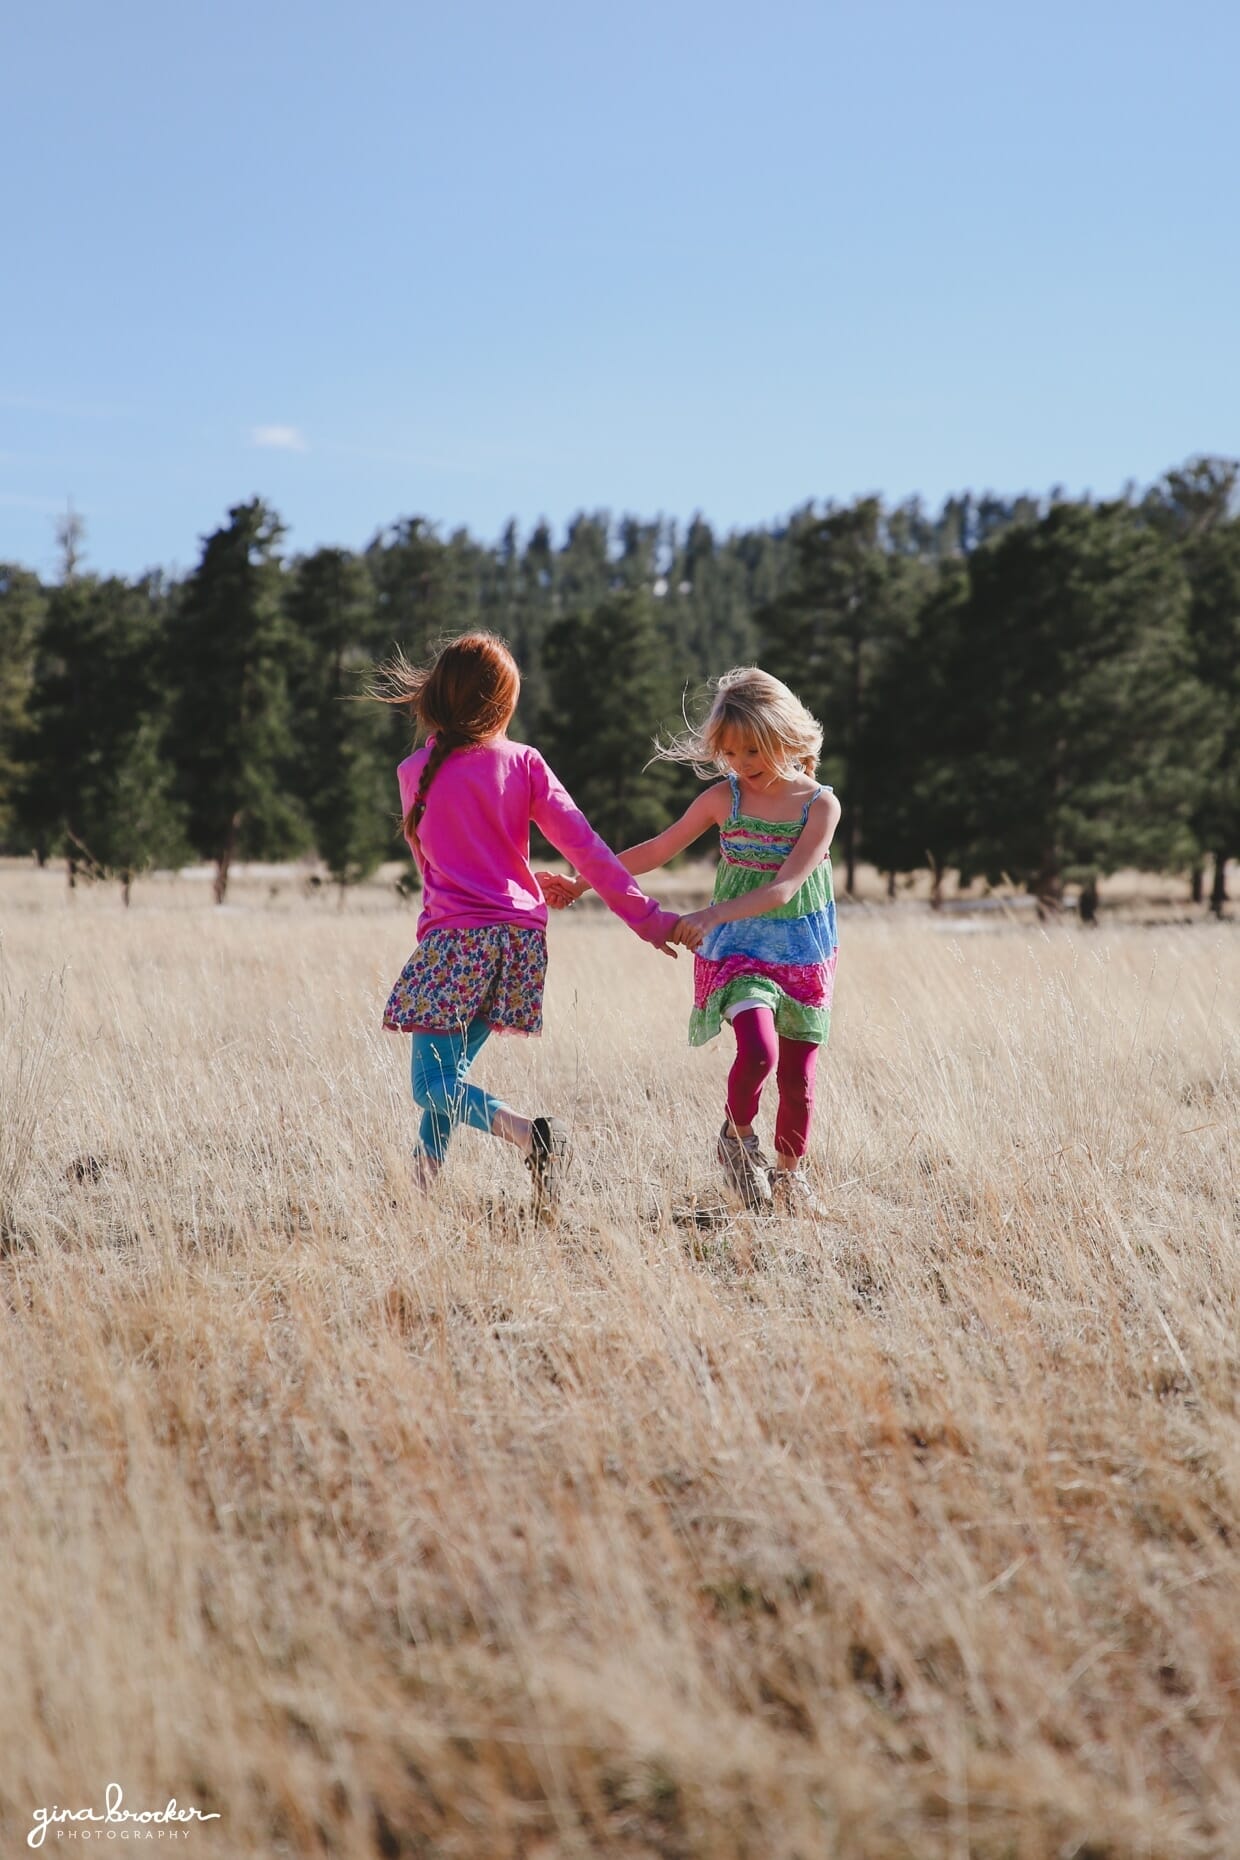 Two kids dance around in a beautiful field during their outdoor family photo session